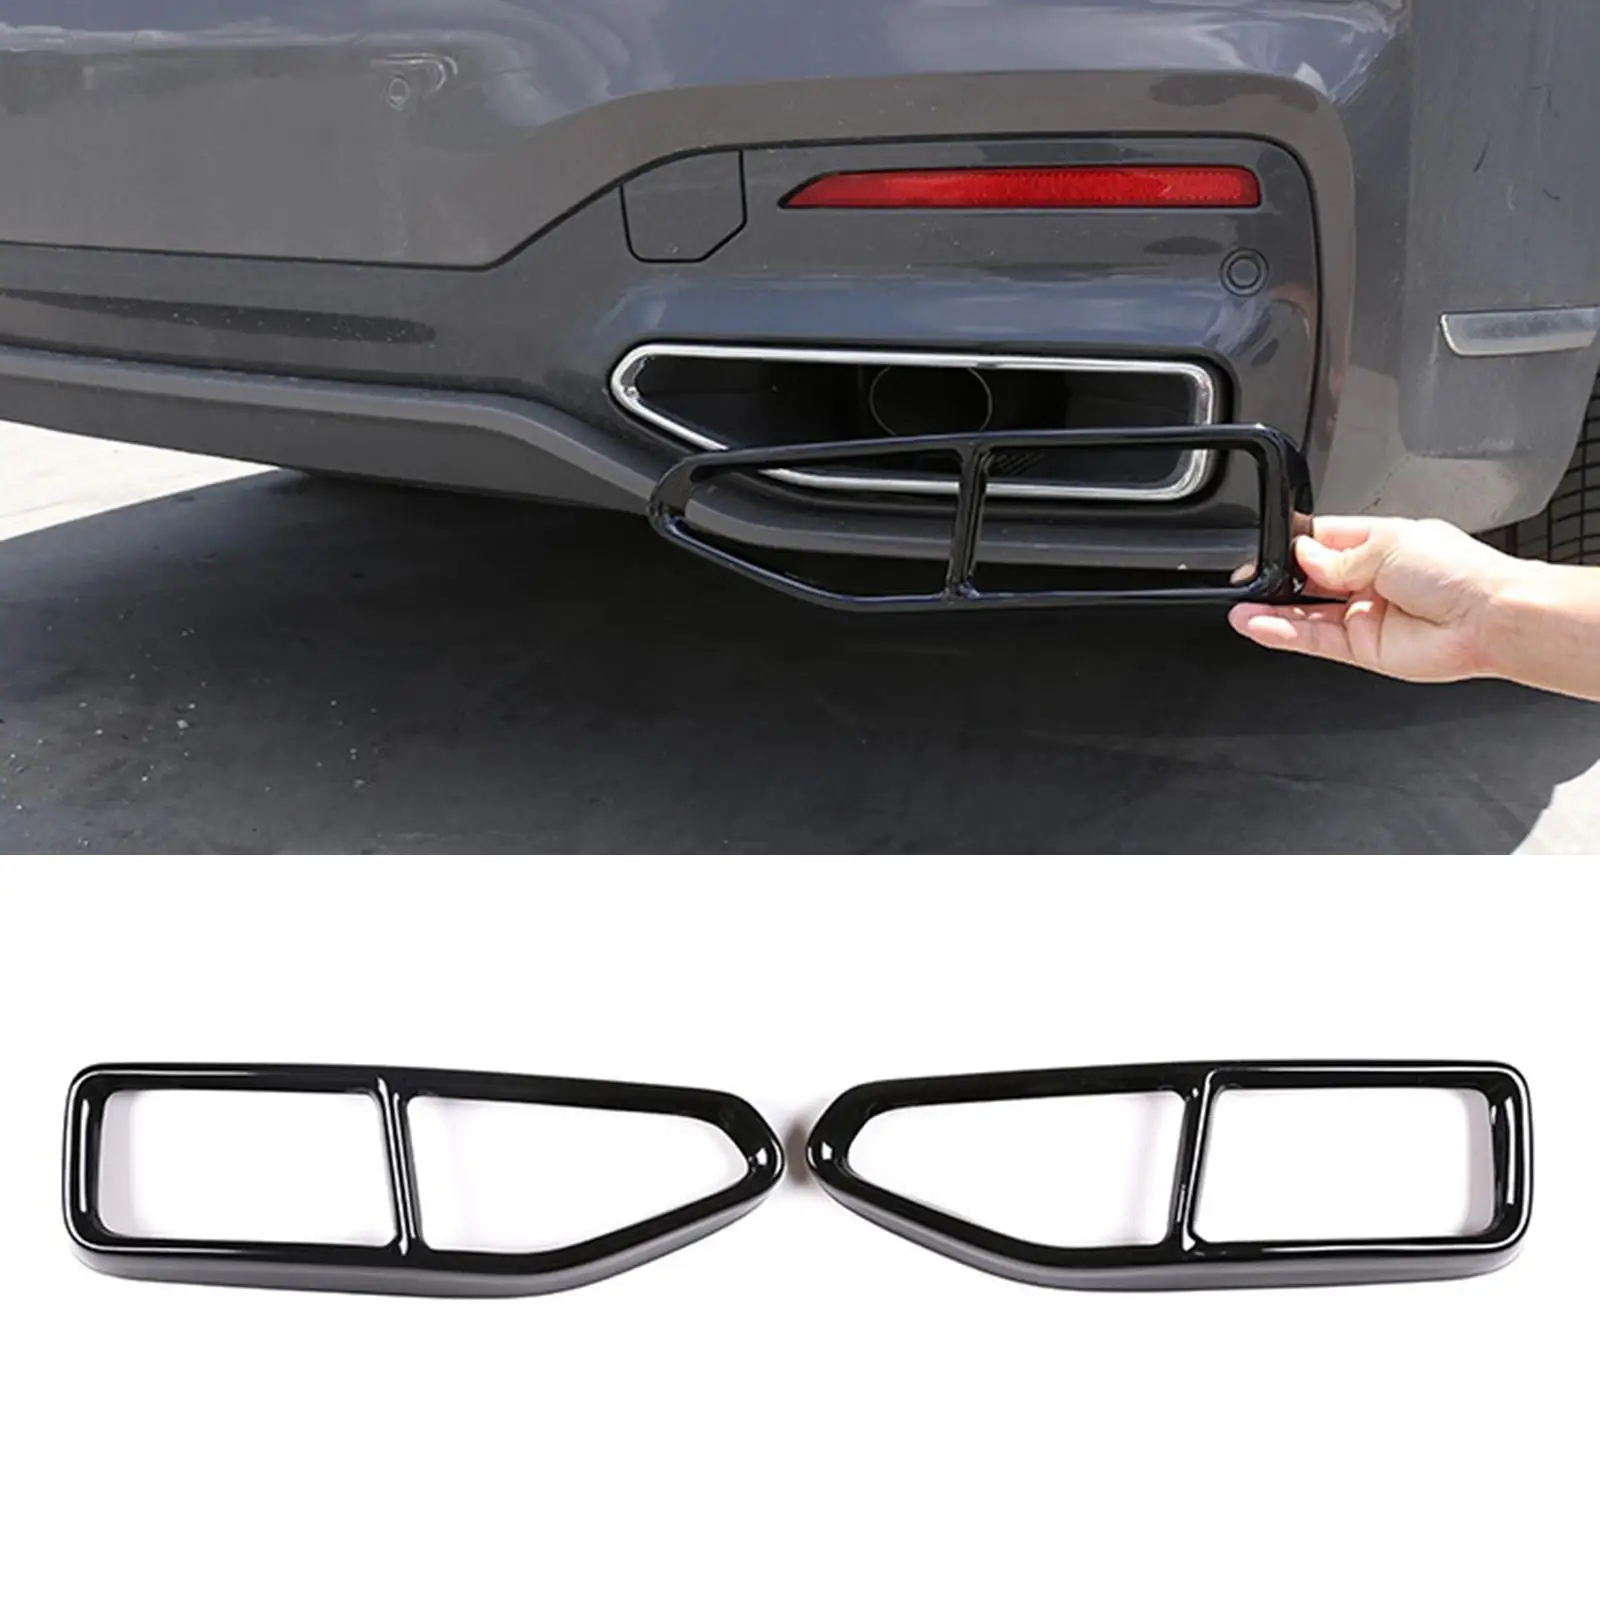 2 Pieces Stainless Steel Tailpipe Trim Frame Weatherproof for  7 G11